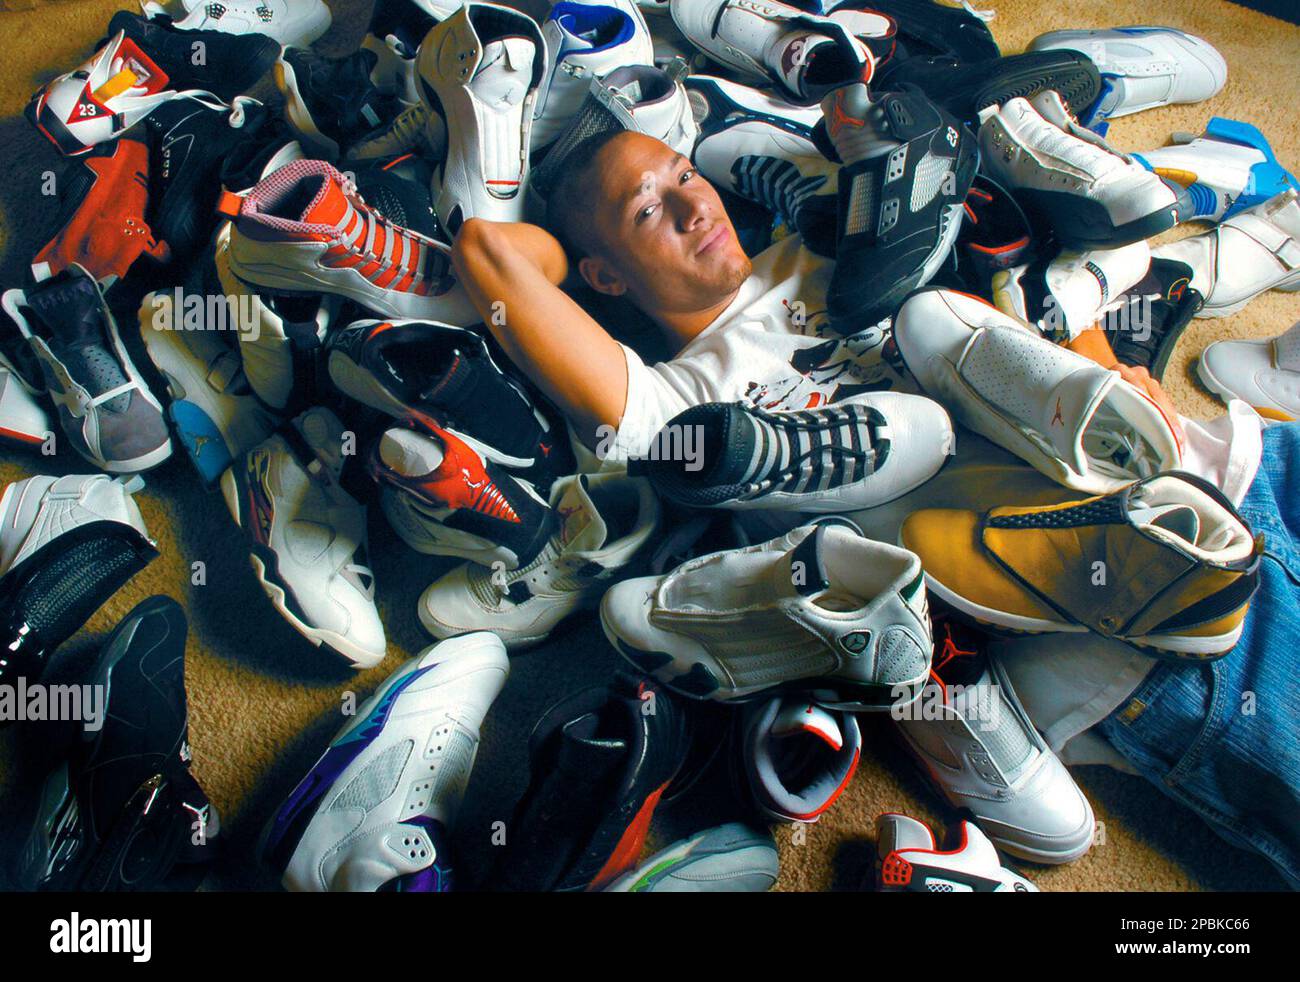 Texas Tech hurdler Bryan Scott sits amid his collection of Nike Air Jordan  basketball shoes, April 9, 2007, in Lubbock, Texas. Scott is addicted.  There's really no other way to put it.